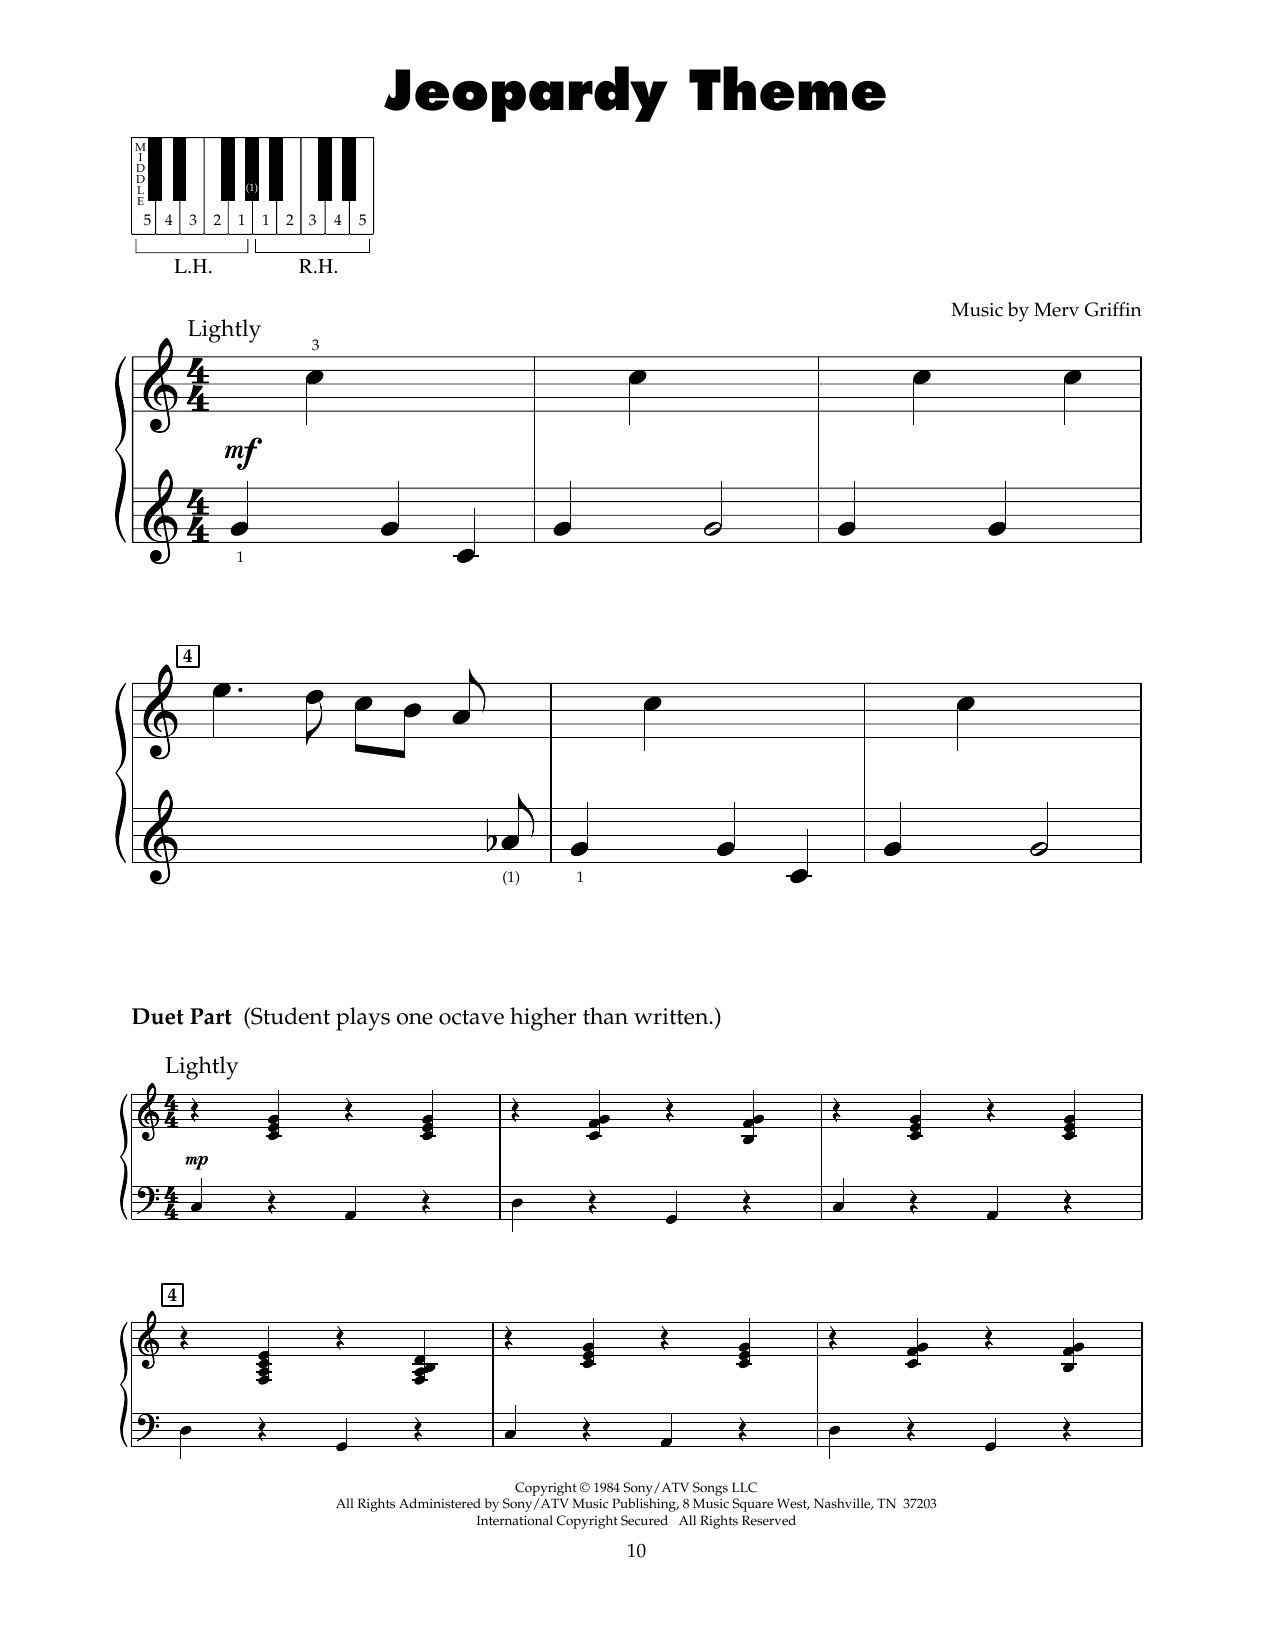 Download Merv Griffin Jeopardy Theme Sheet Music